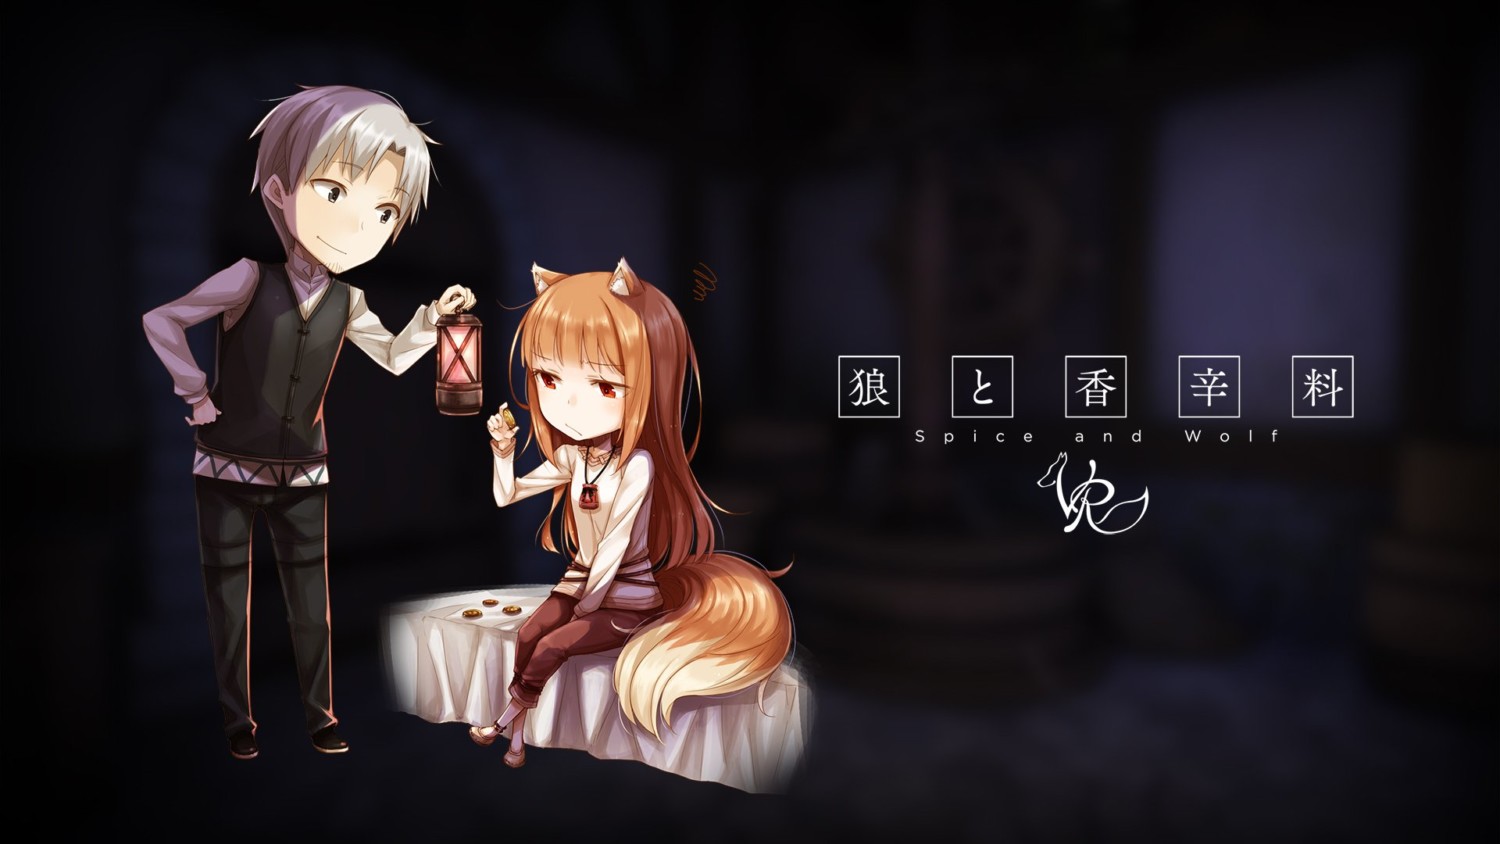 apotek Scene ophobe Spice And Wolf VR Officially Coming To Switch, Will Support LABO VR Goggles  – NintendoSoup